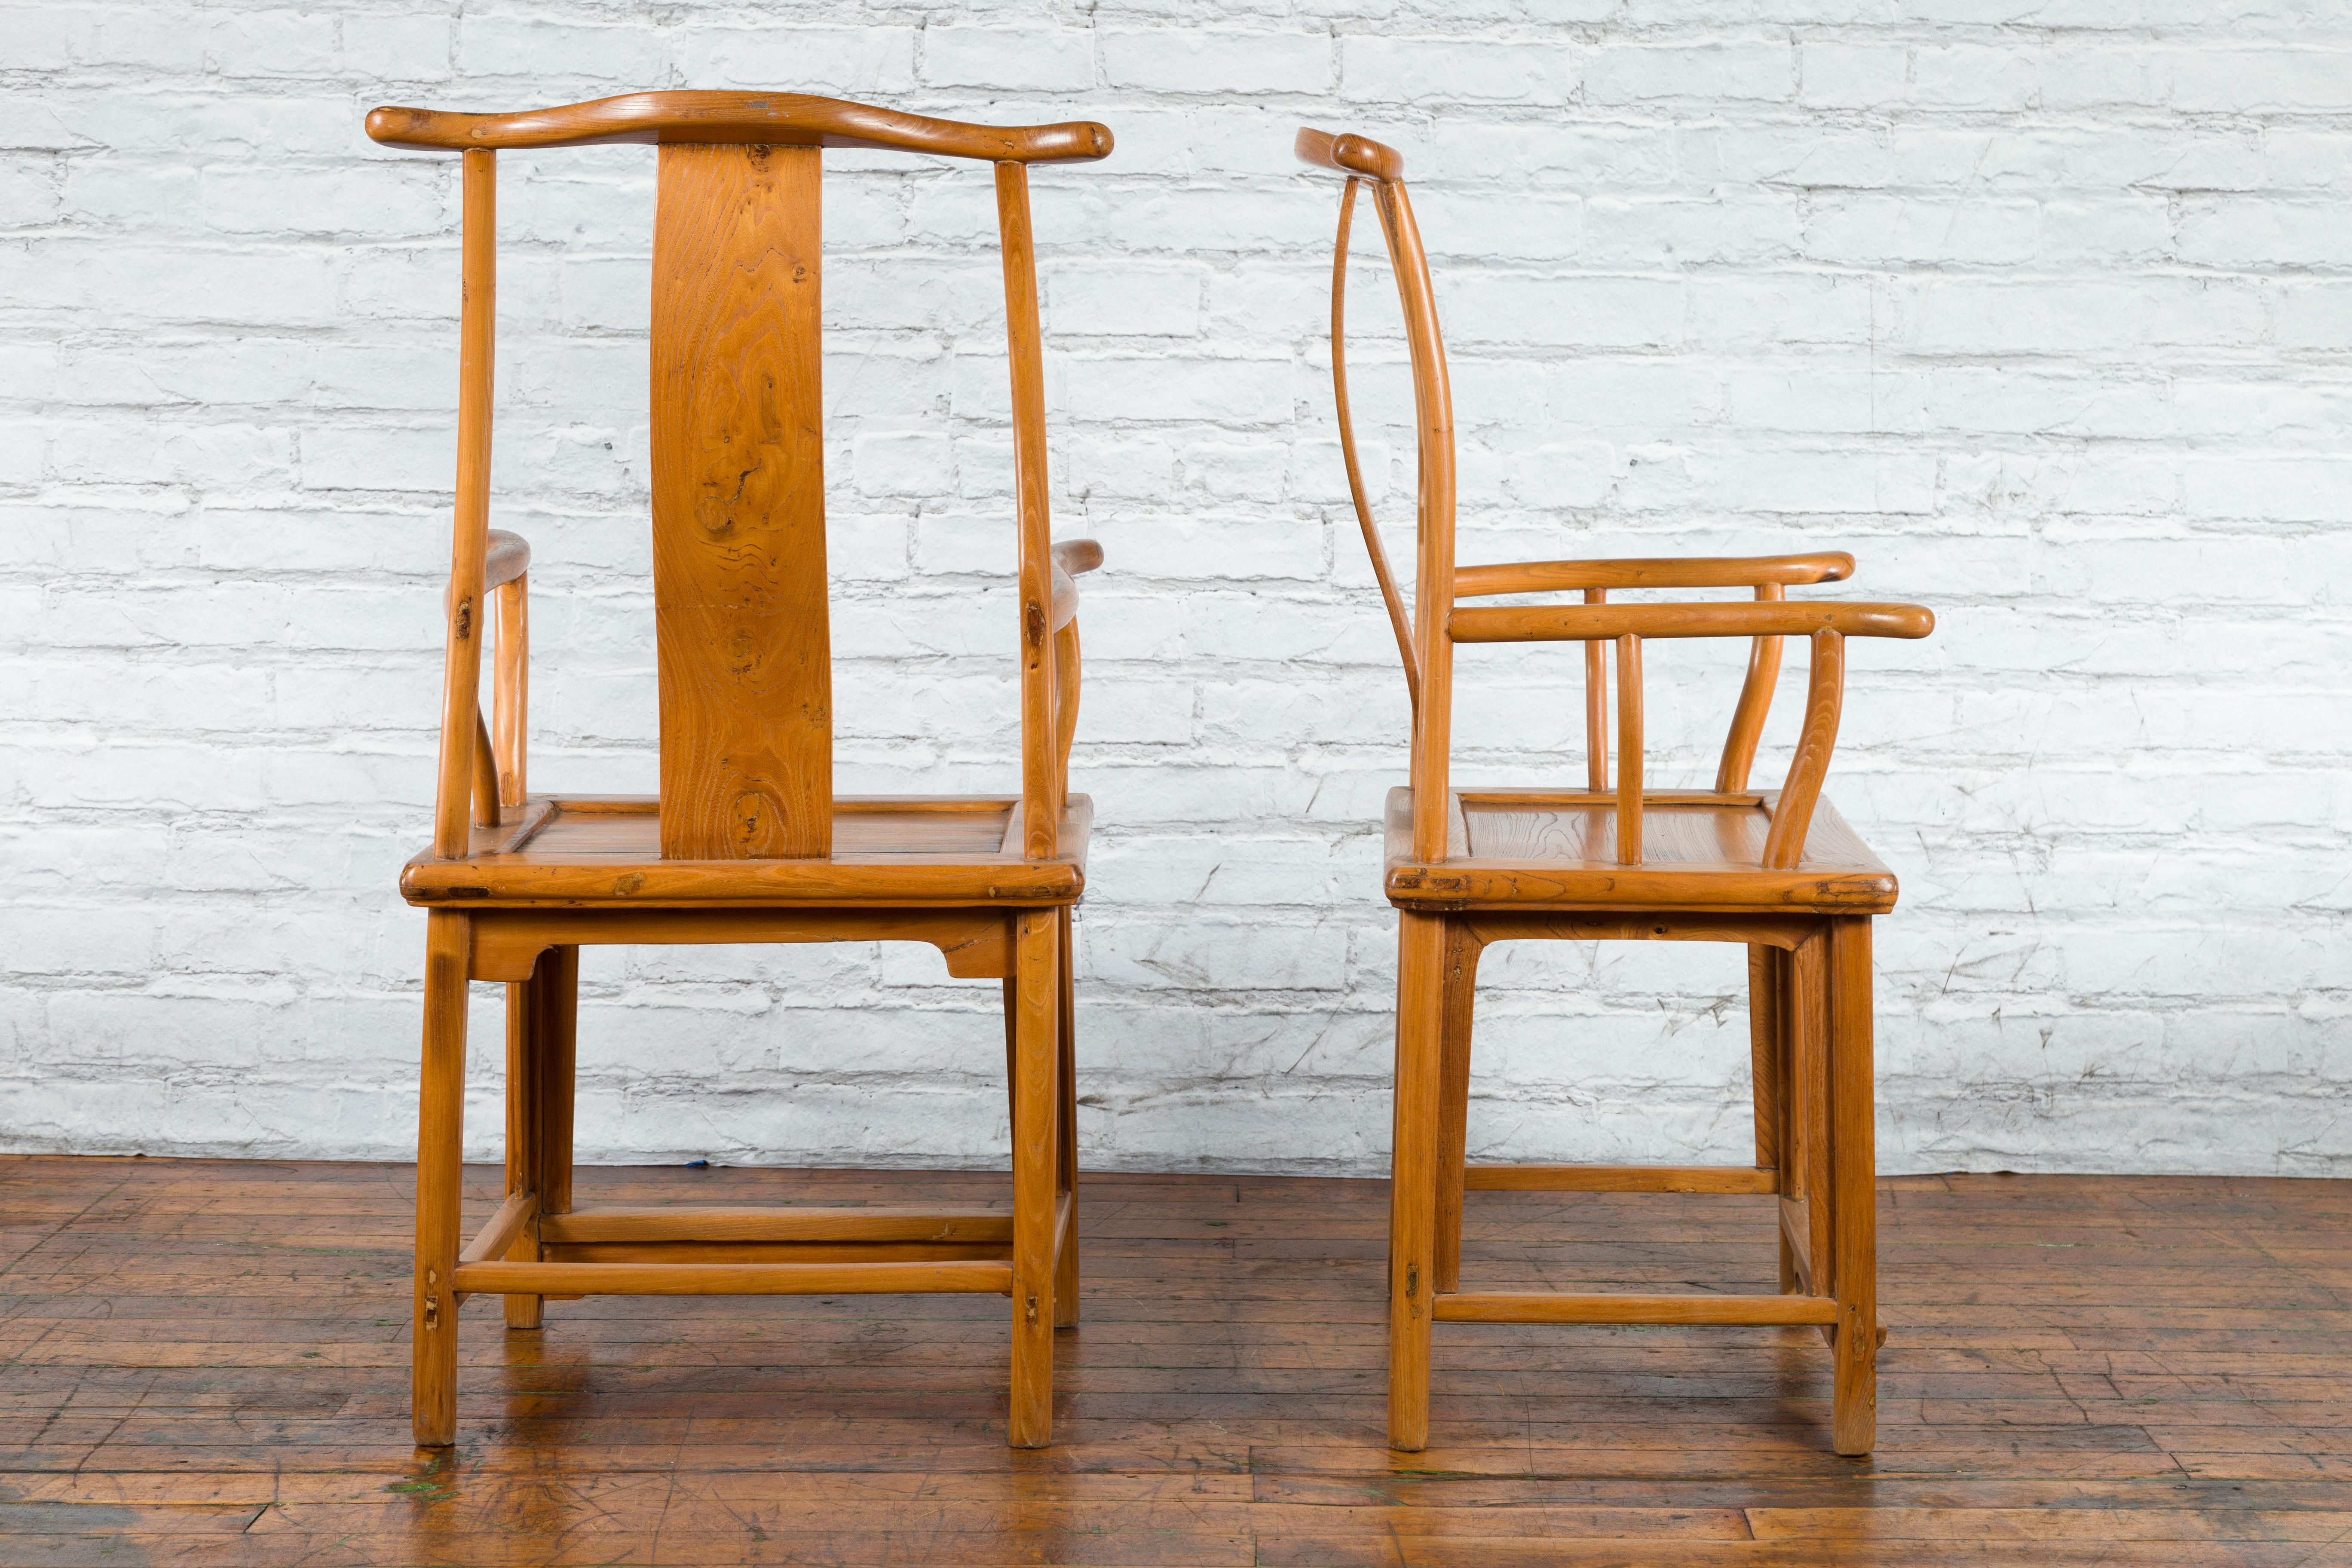 Pair of Chinese Qing Dynasty 19th Century Lamp Hanger Chairs with Natural Patina For Sale 1